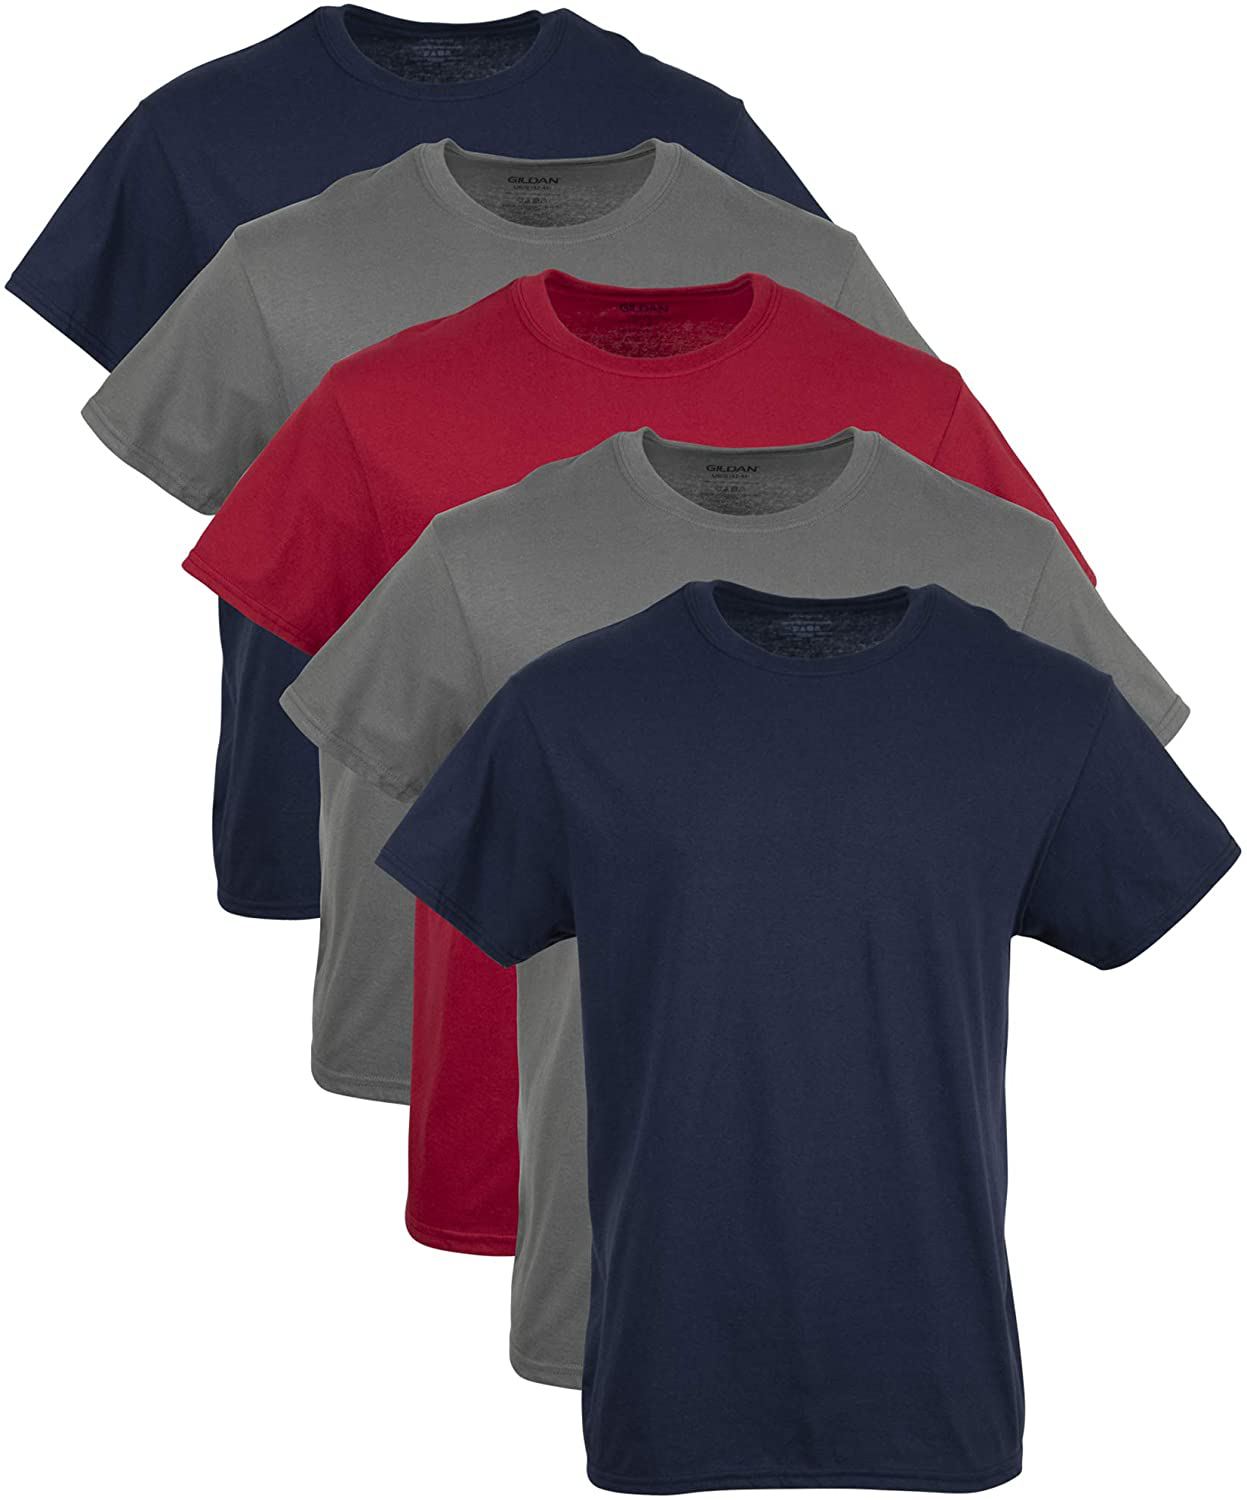 5 Pack Men's Crew T-Shirts in Assorted Colors